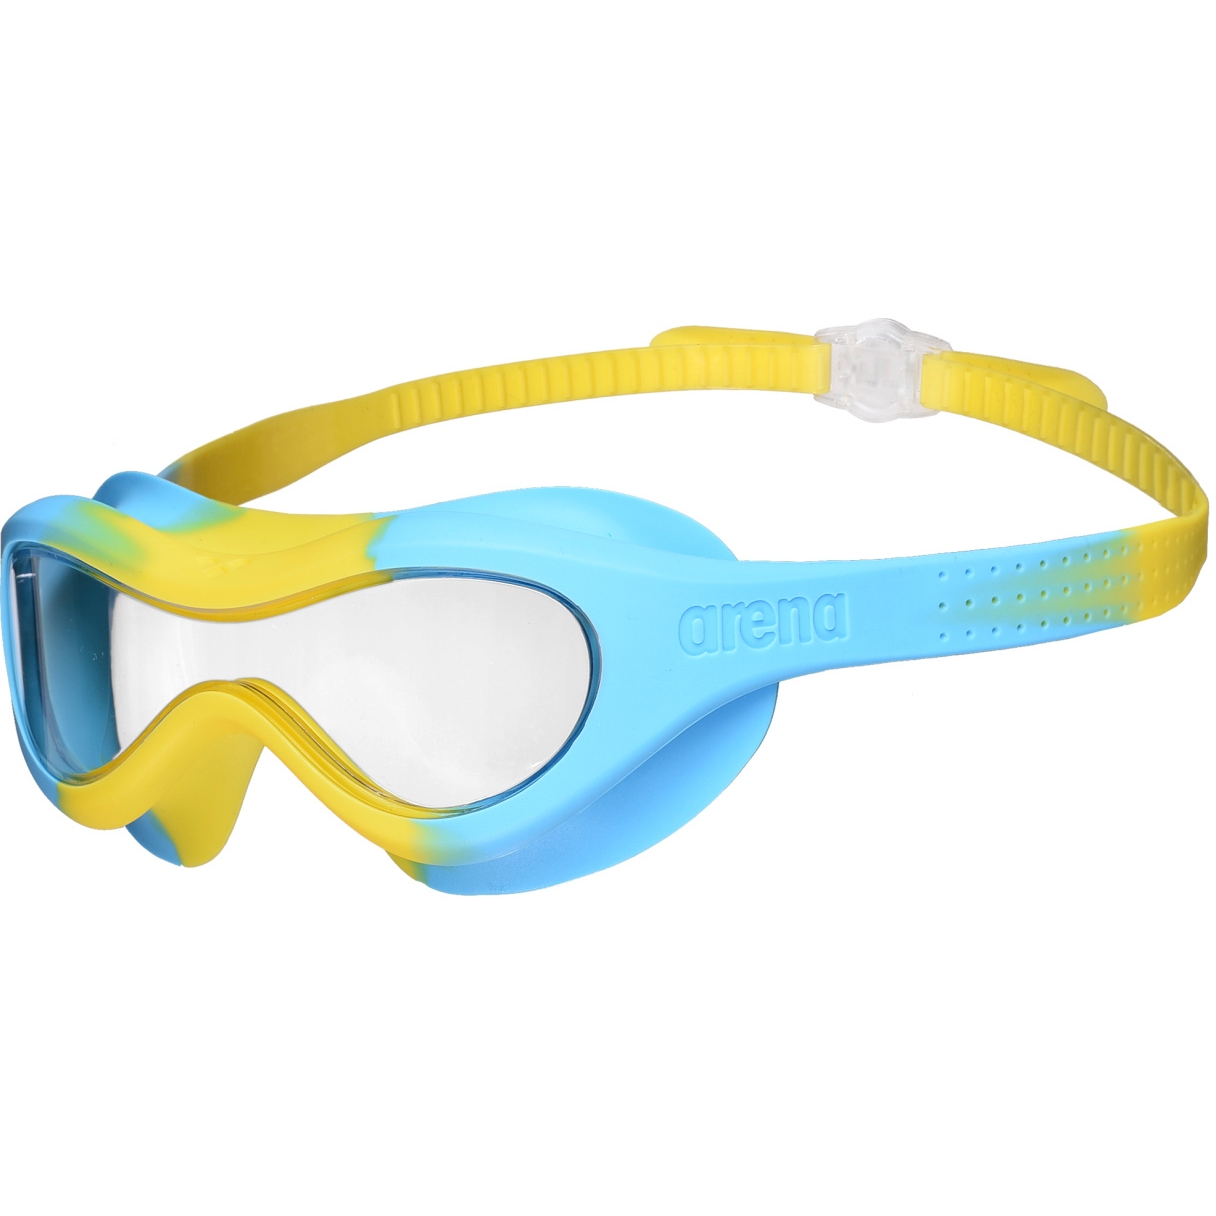 Picture of arena Spider Kids Mask Swimming Goggles - Clear - Yellow/Lightblue